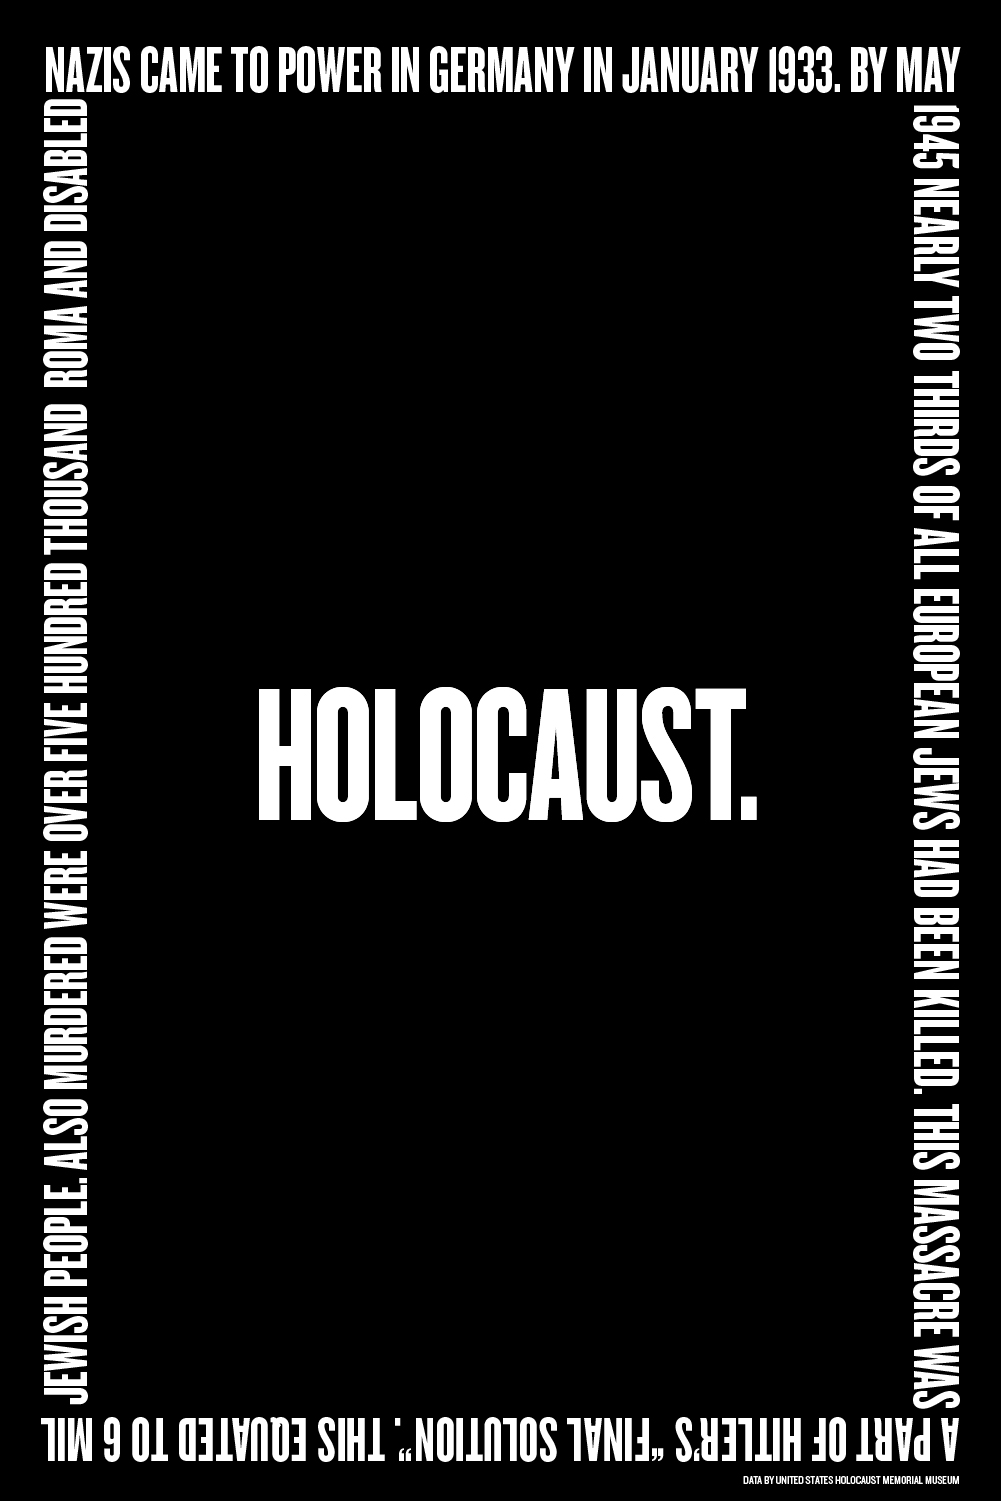 Poster with facts about the Holocaust